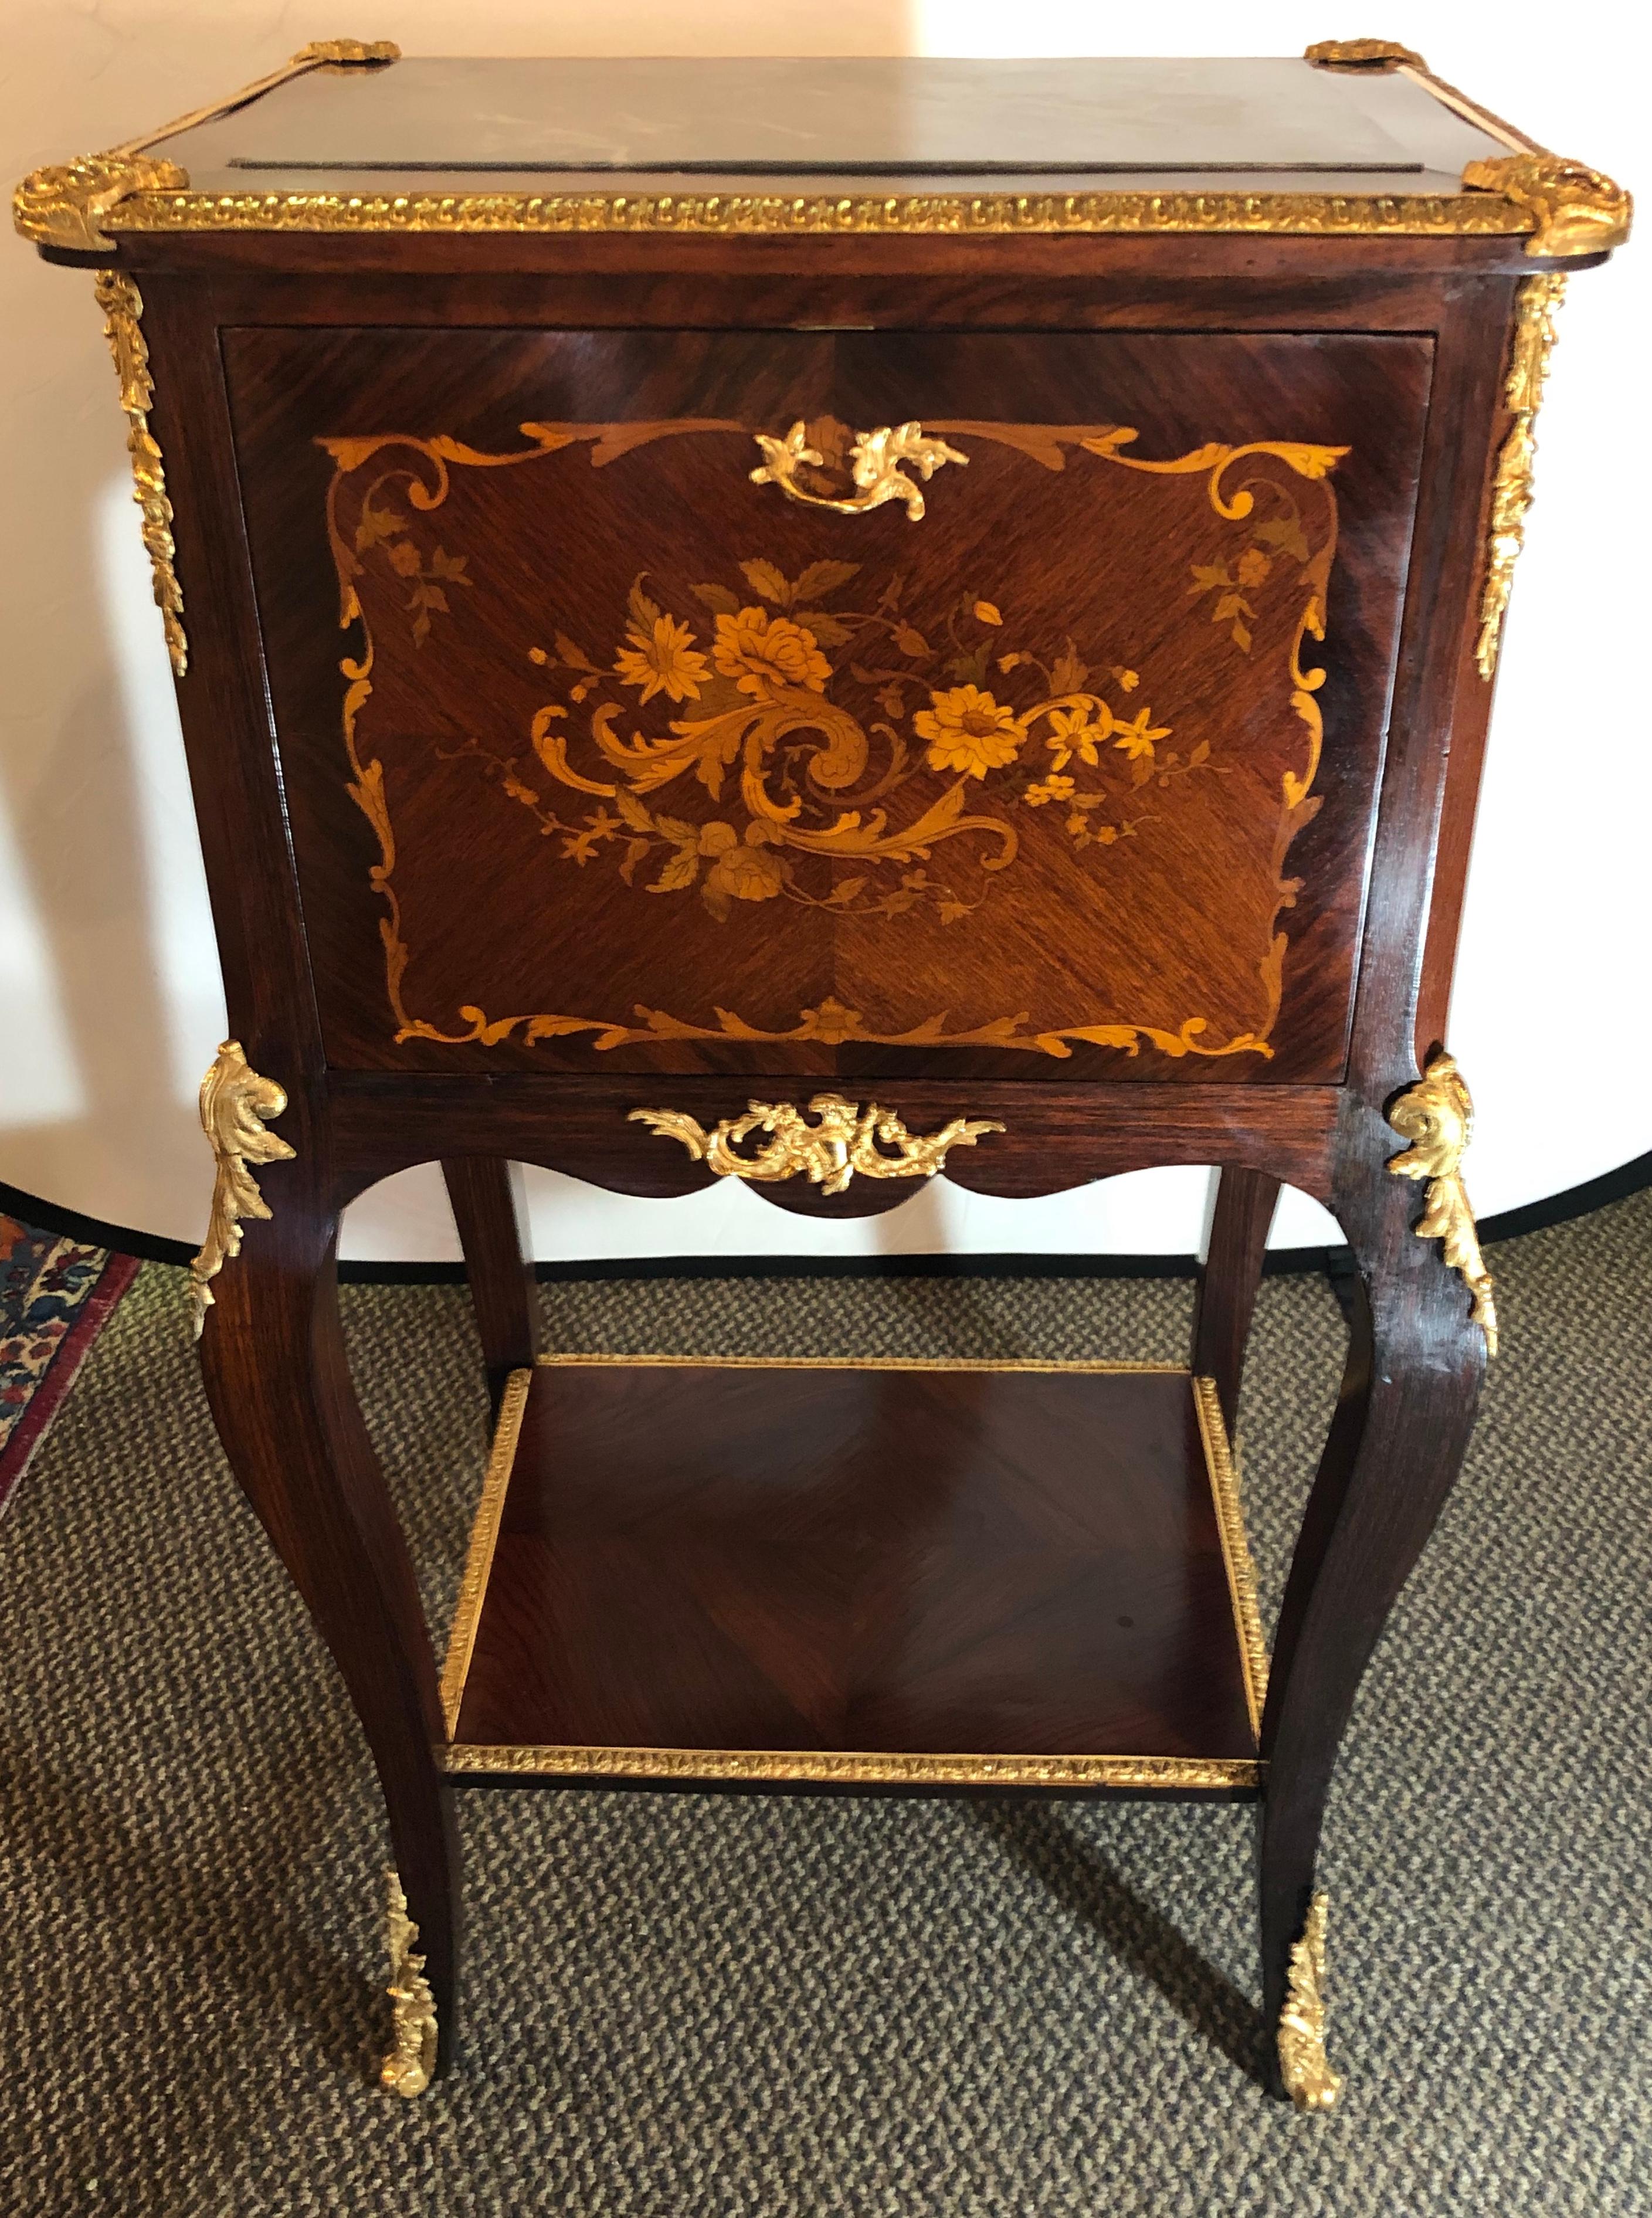 Very fine Louis XV style bar cabinet with gilt bronze mounts and floral marquetry. Unusual large size.
Hardware stamped with double keys signed Brevete Paris. Measurements when fully open are 38 inches depth x 42.5 inches width. Fully refinished to